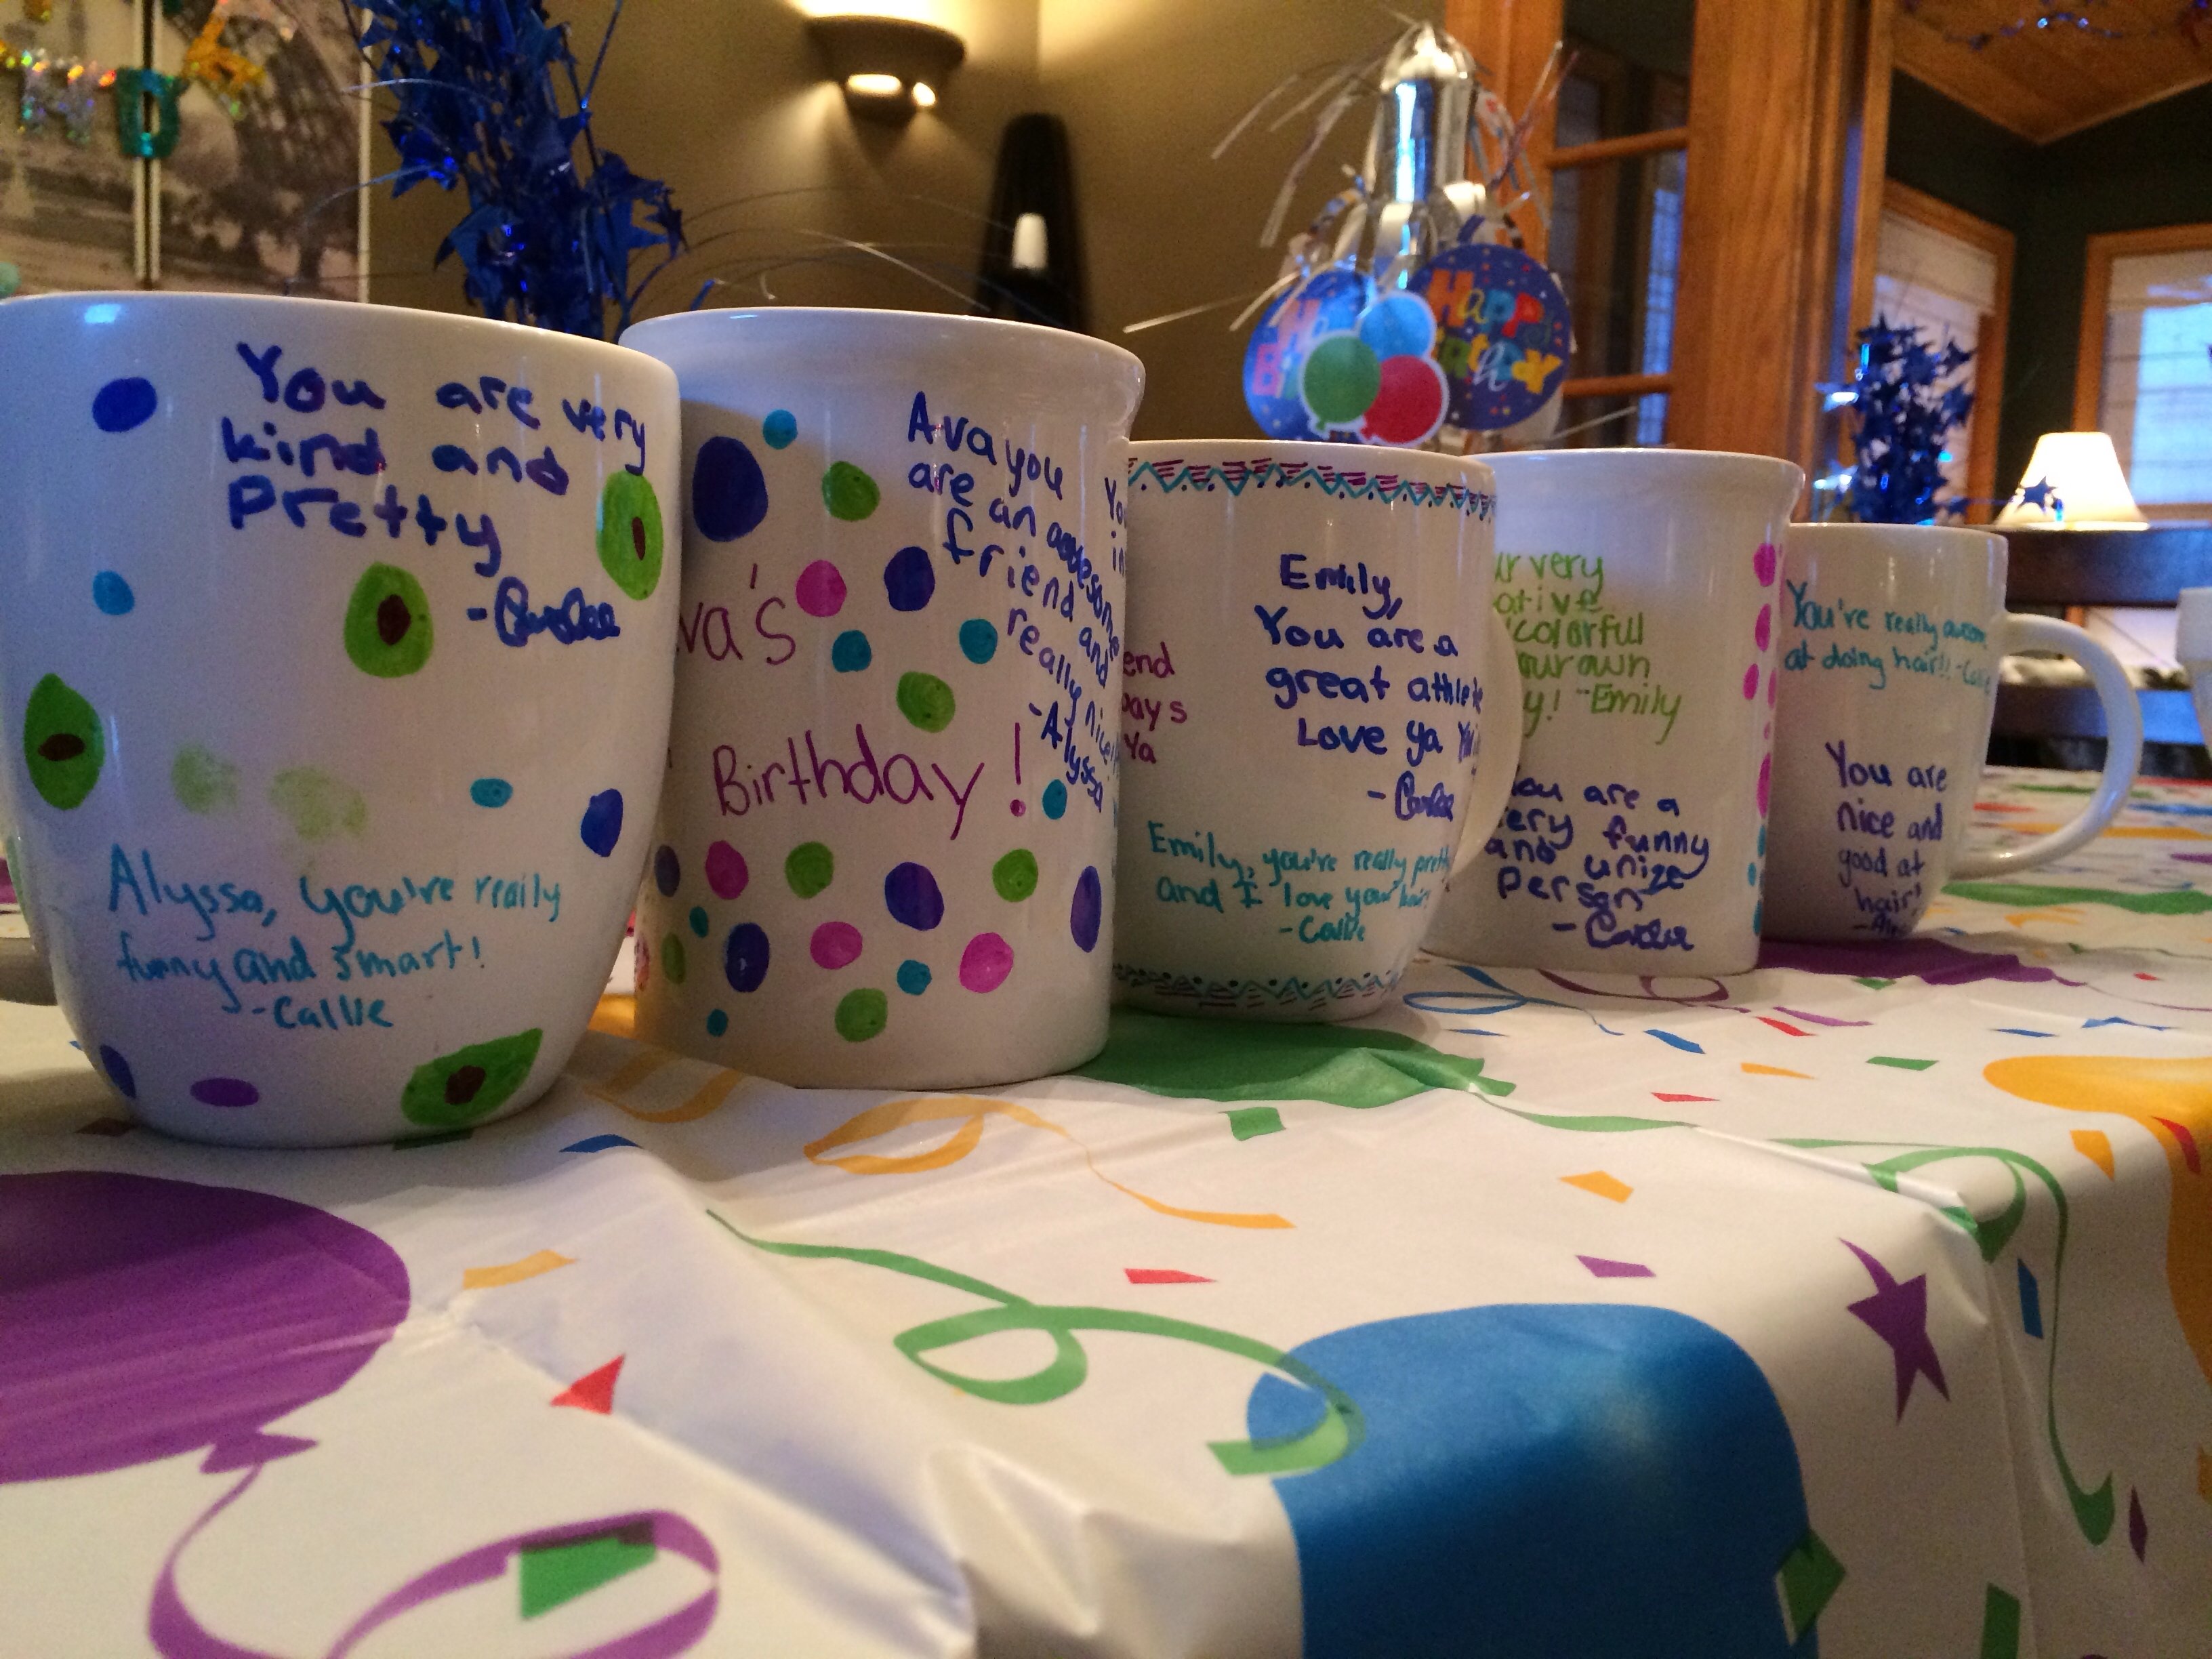 10 Fabulous 12 Year Old Birthday Party Ideas For Girls glamorous 12 year old birthday party games ideas sharpie mugs fun 1 2022